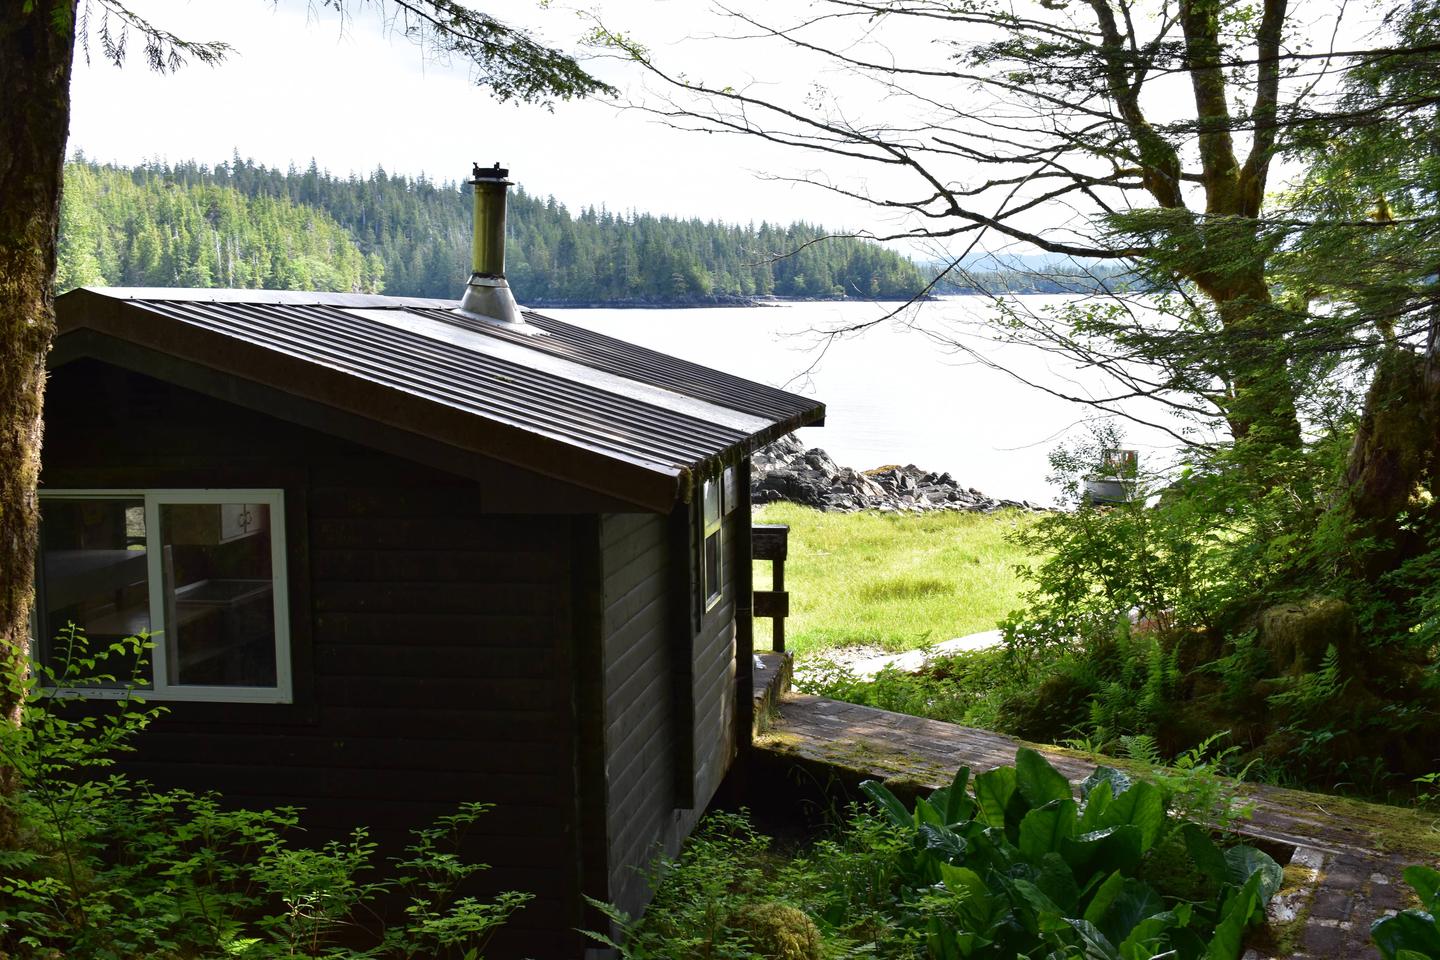 View of Alava Bay with cabin in foregroundAlava Bay with cabin.